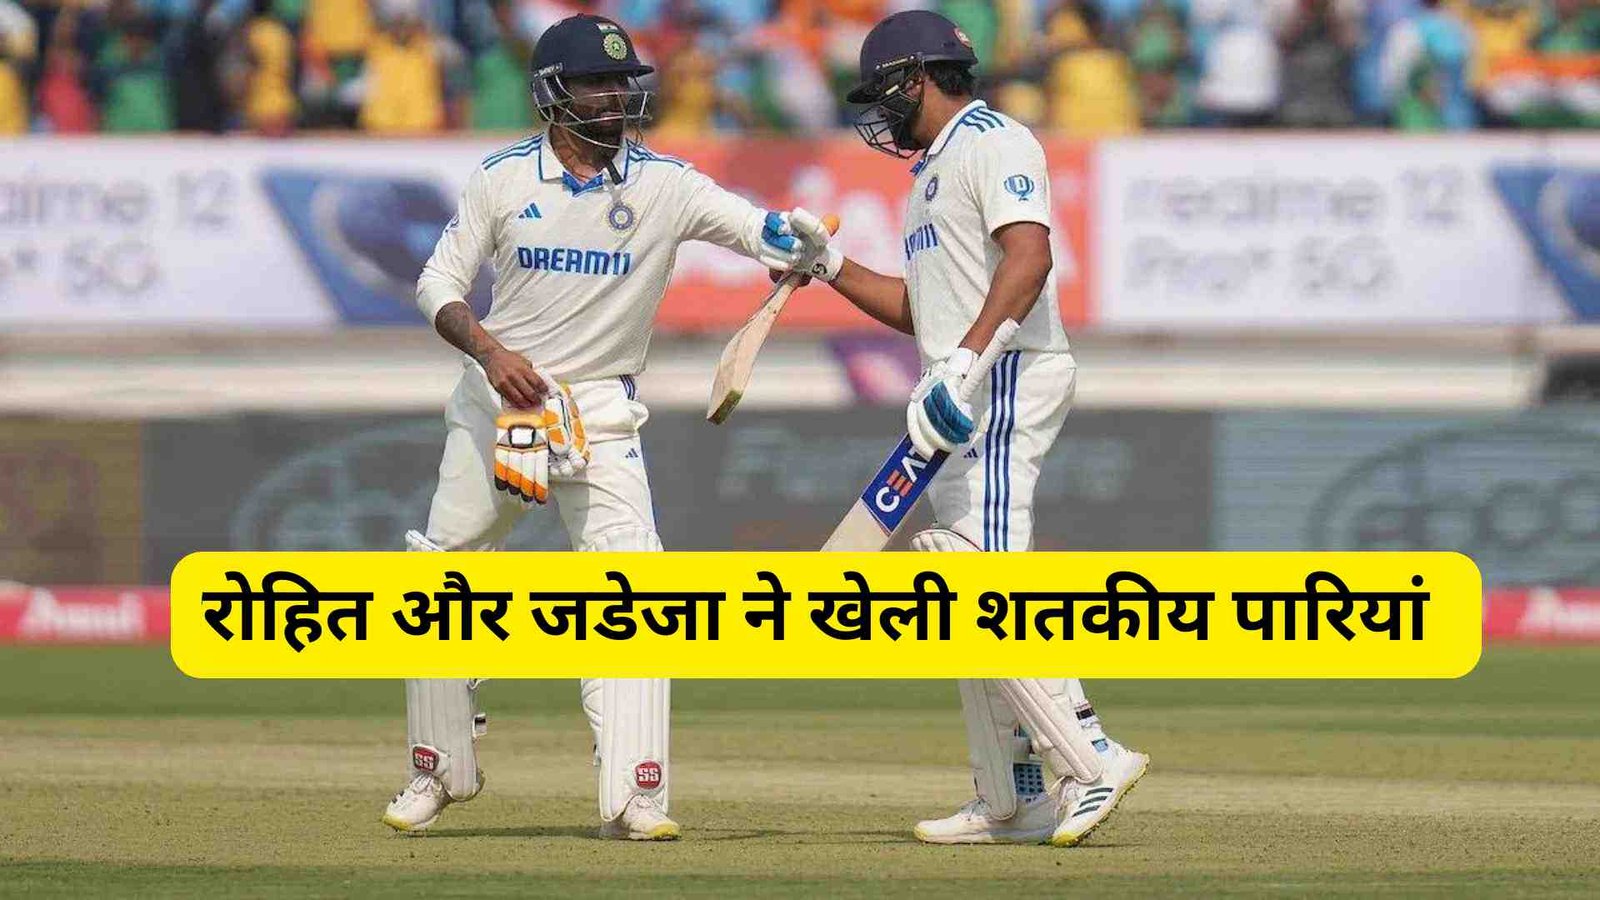 Ind v/s Eng 3rd test मैच का पहला दिन?